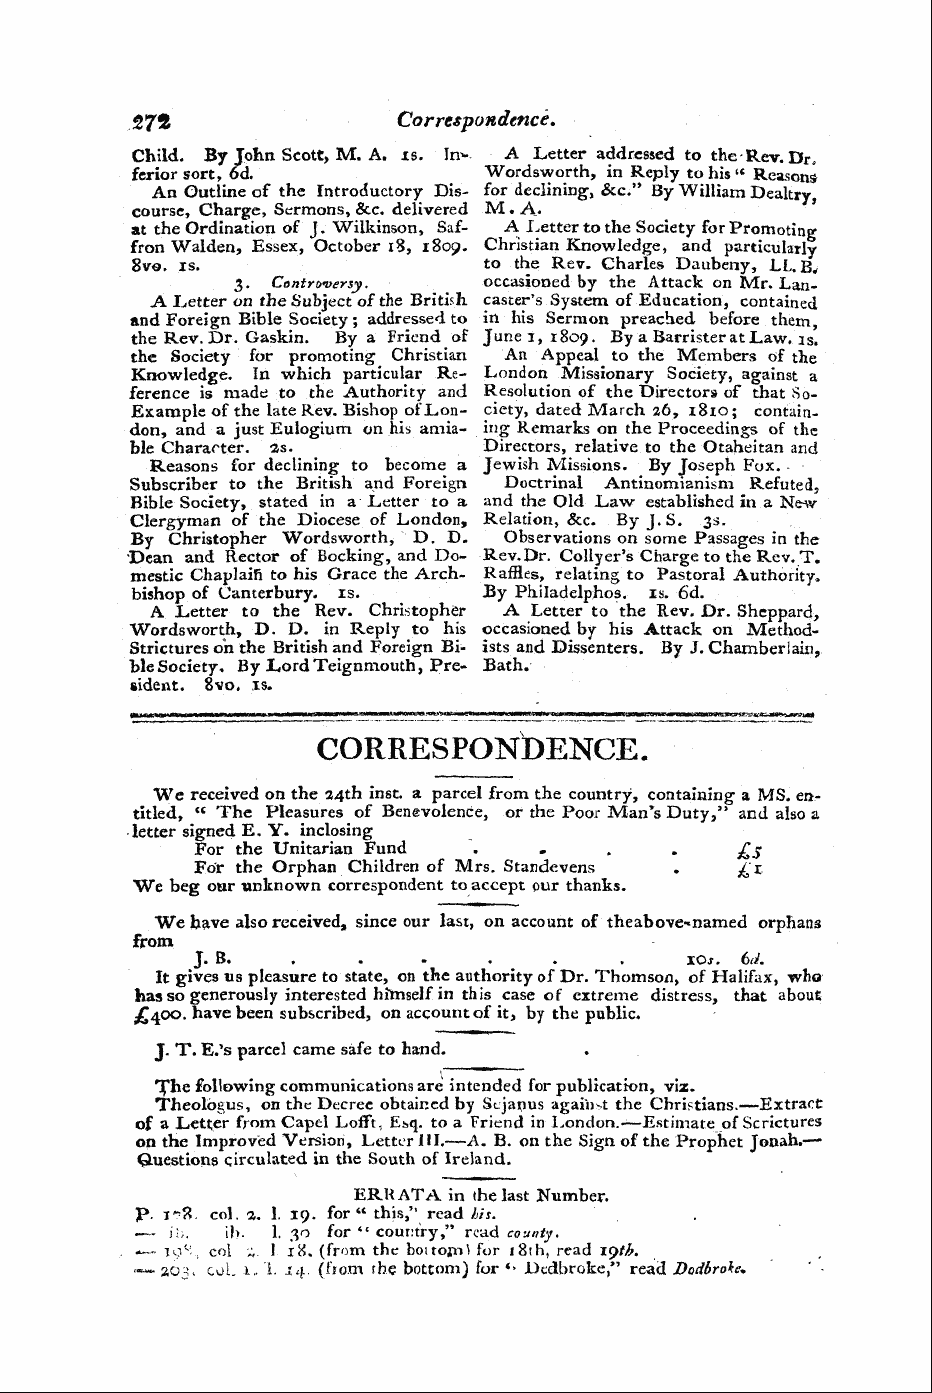 Monthly Repository (1806-1838) and Unitarian Chronicle (1832-1833): F Y, 1st edition - 275 Correspondence.